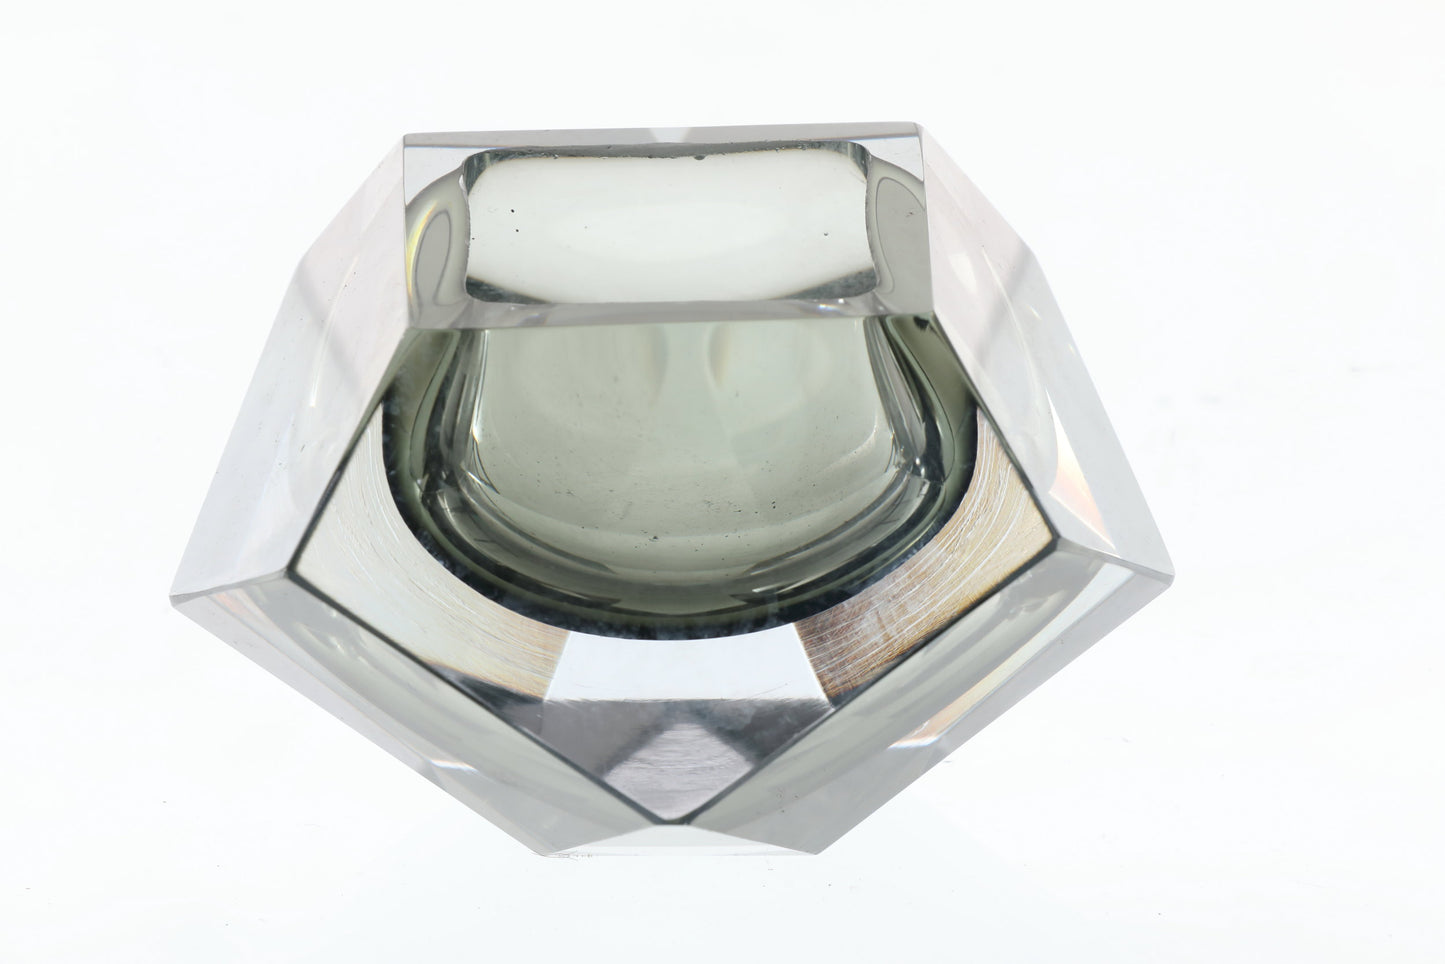 Faceted submerged glass ashtray